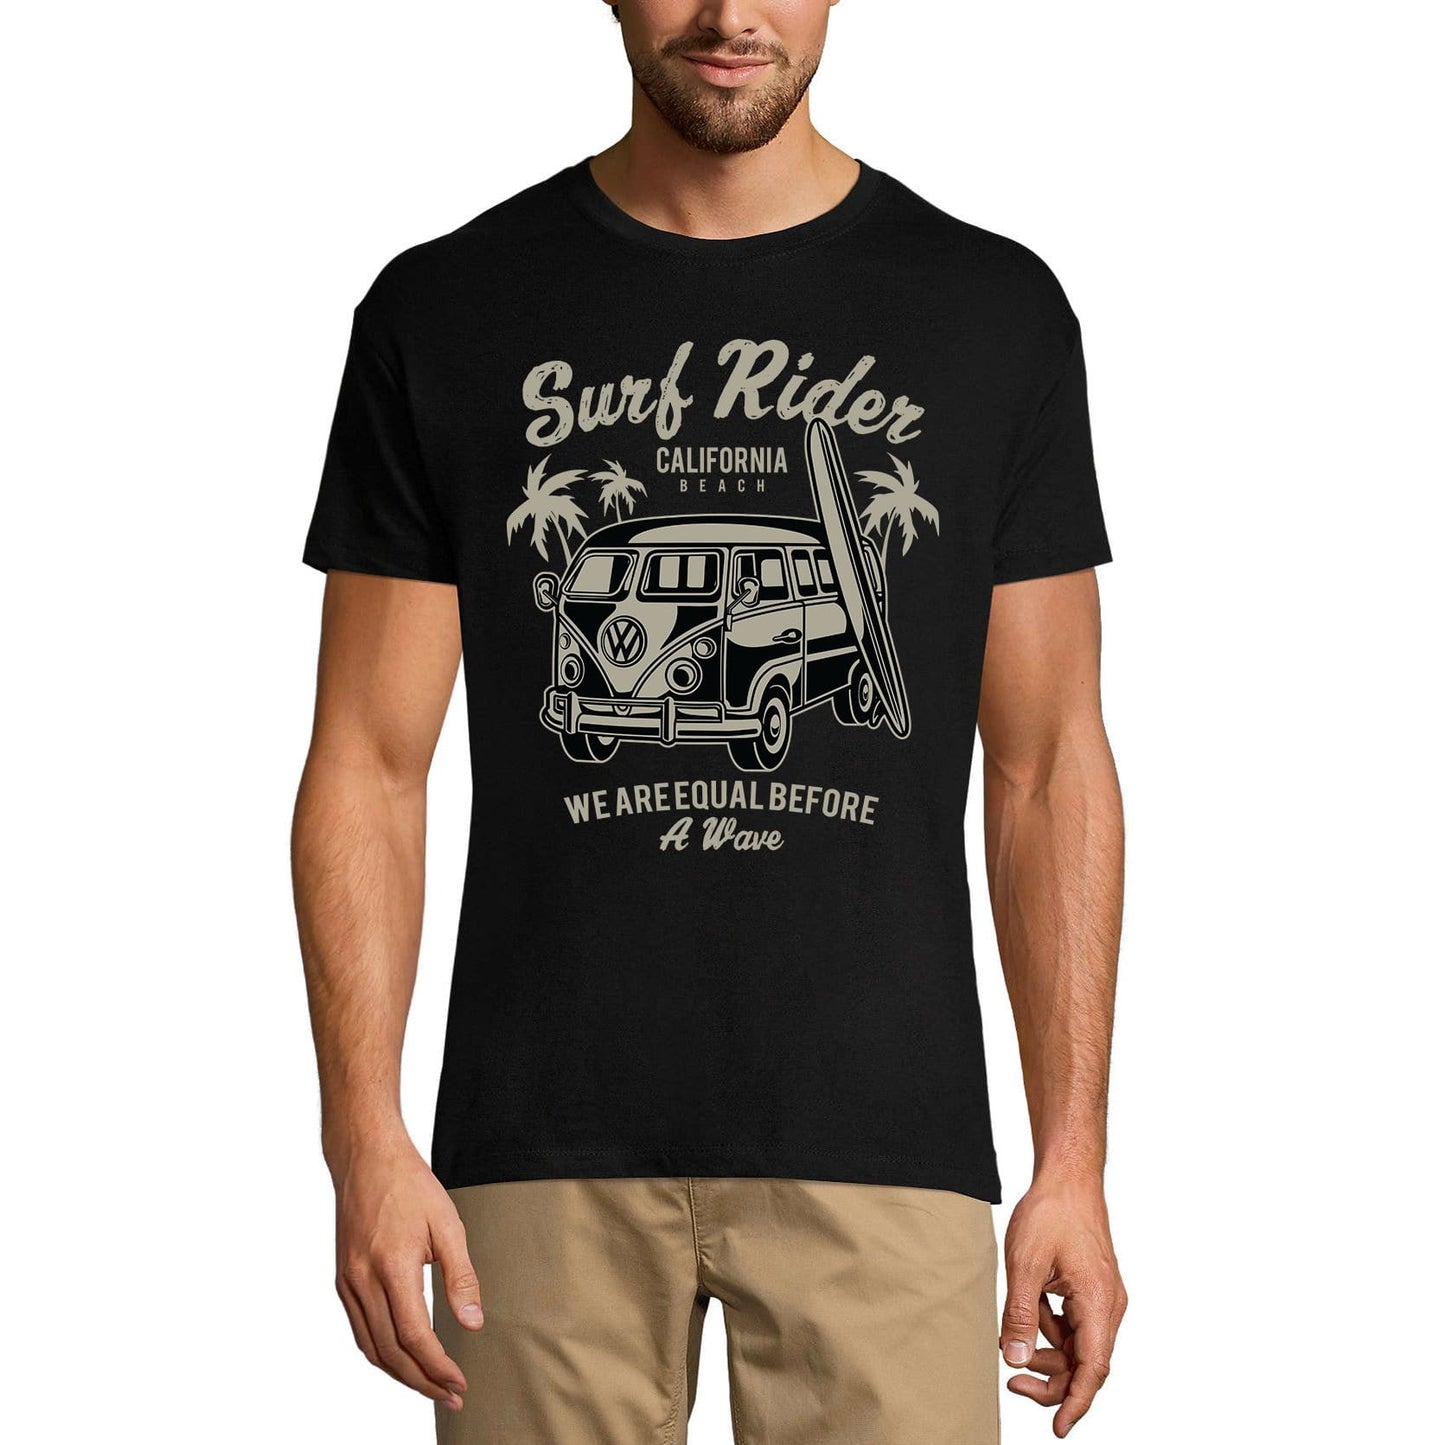 ULTRABASIC Men's Graphic T-Shirt Surf Rider California Beach - We Are Equal Before A Wave